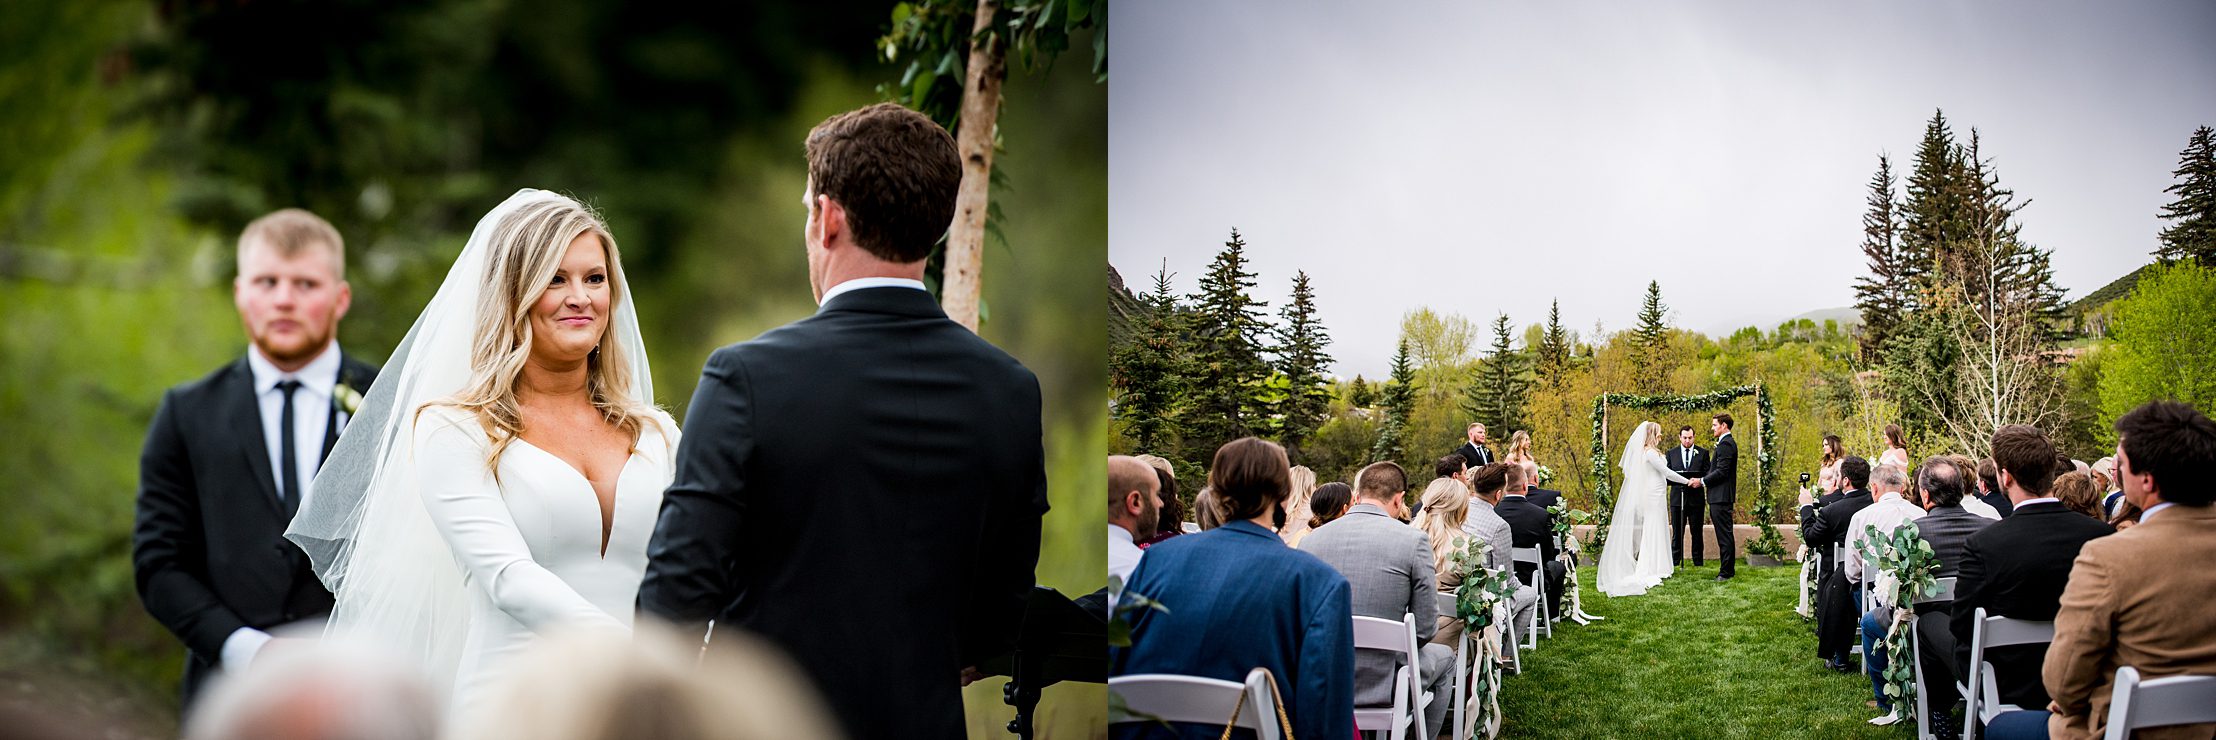 mountain wedding ceremony at the Westin Riverfront